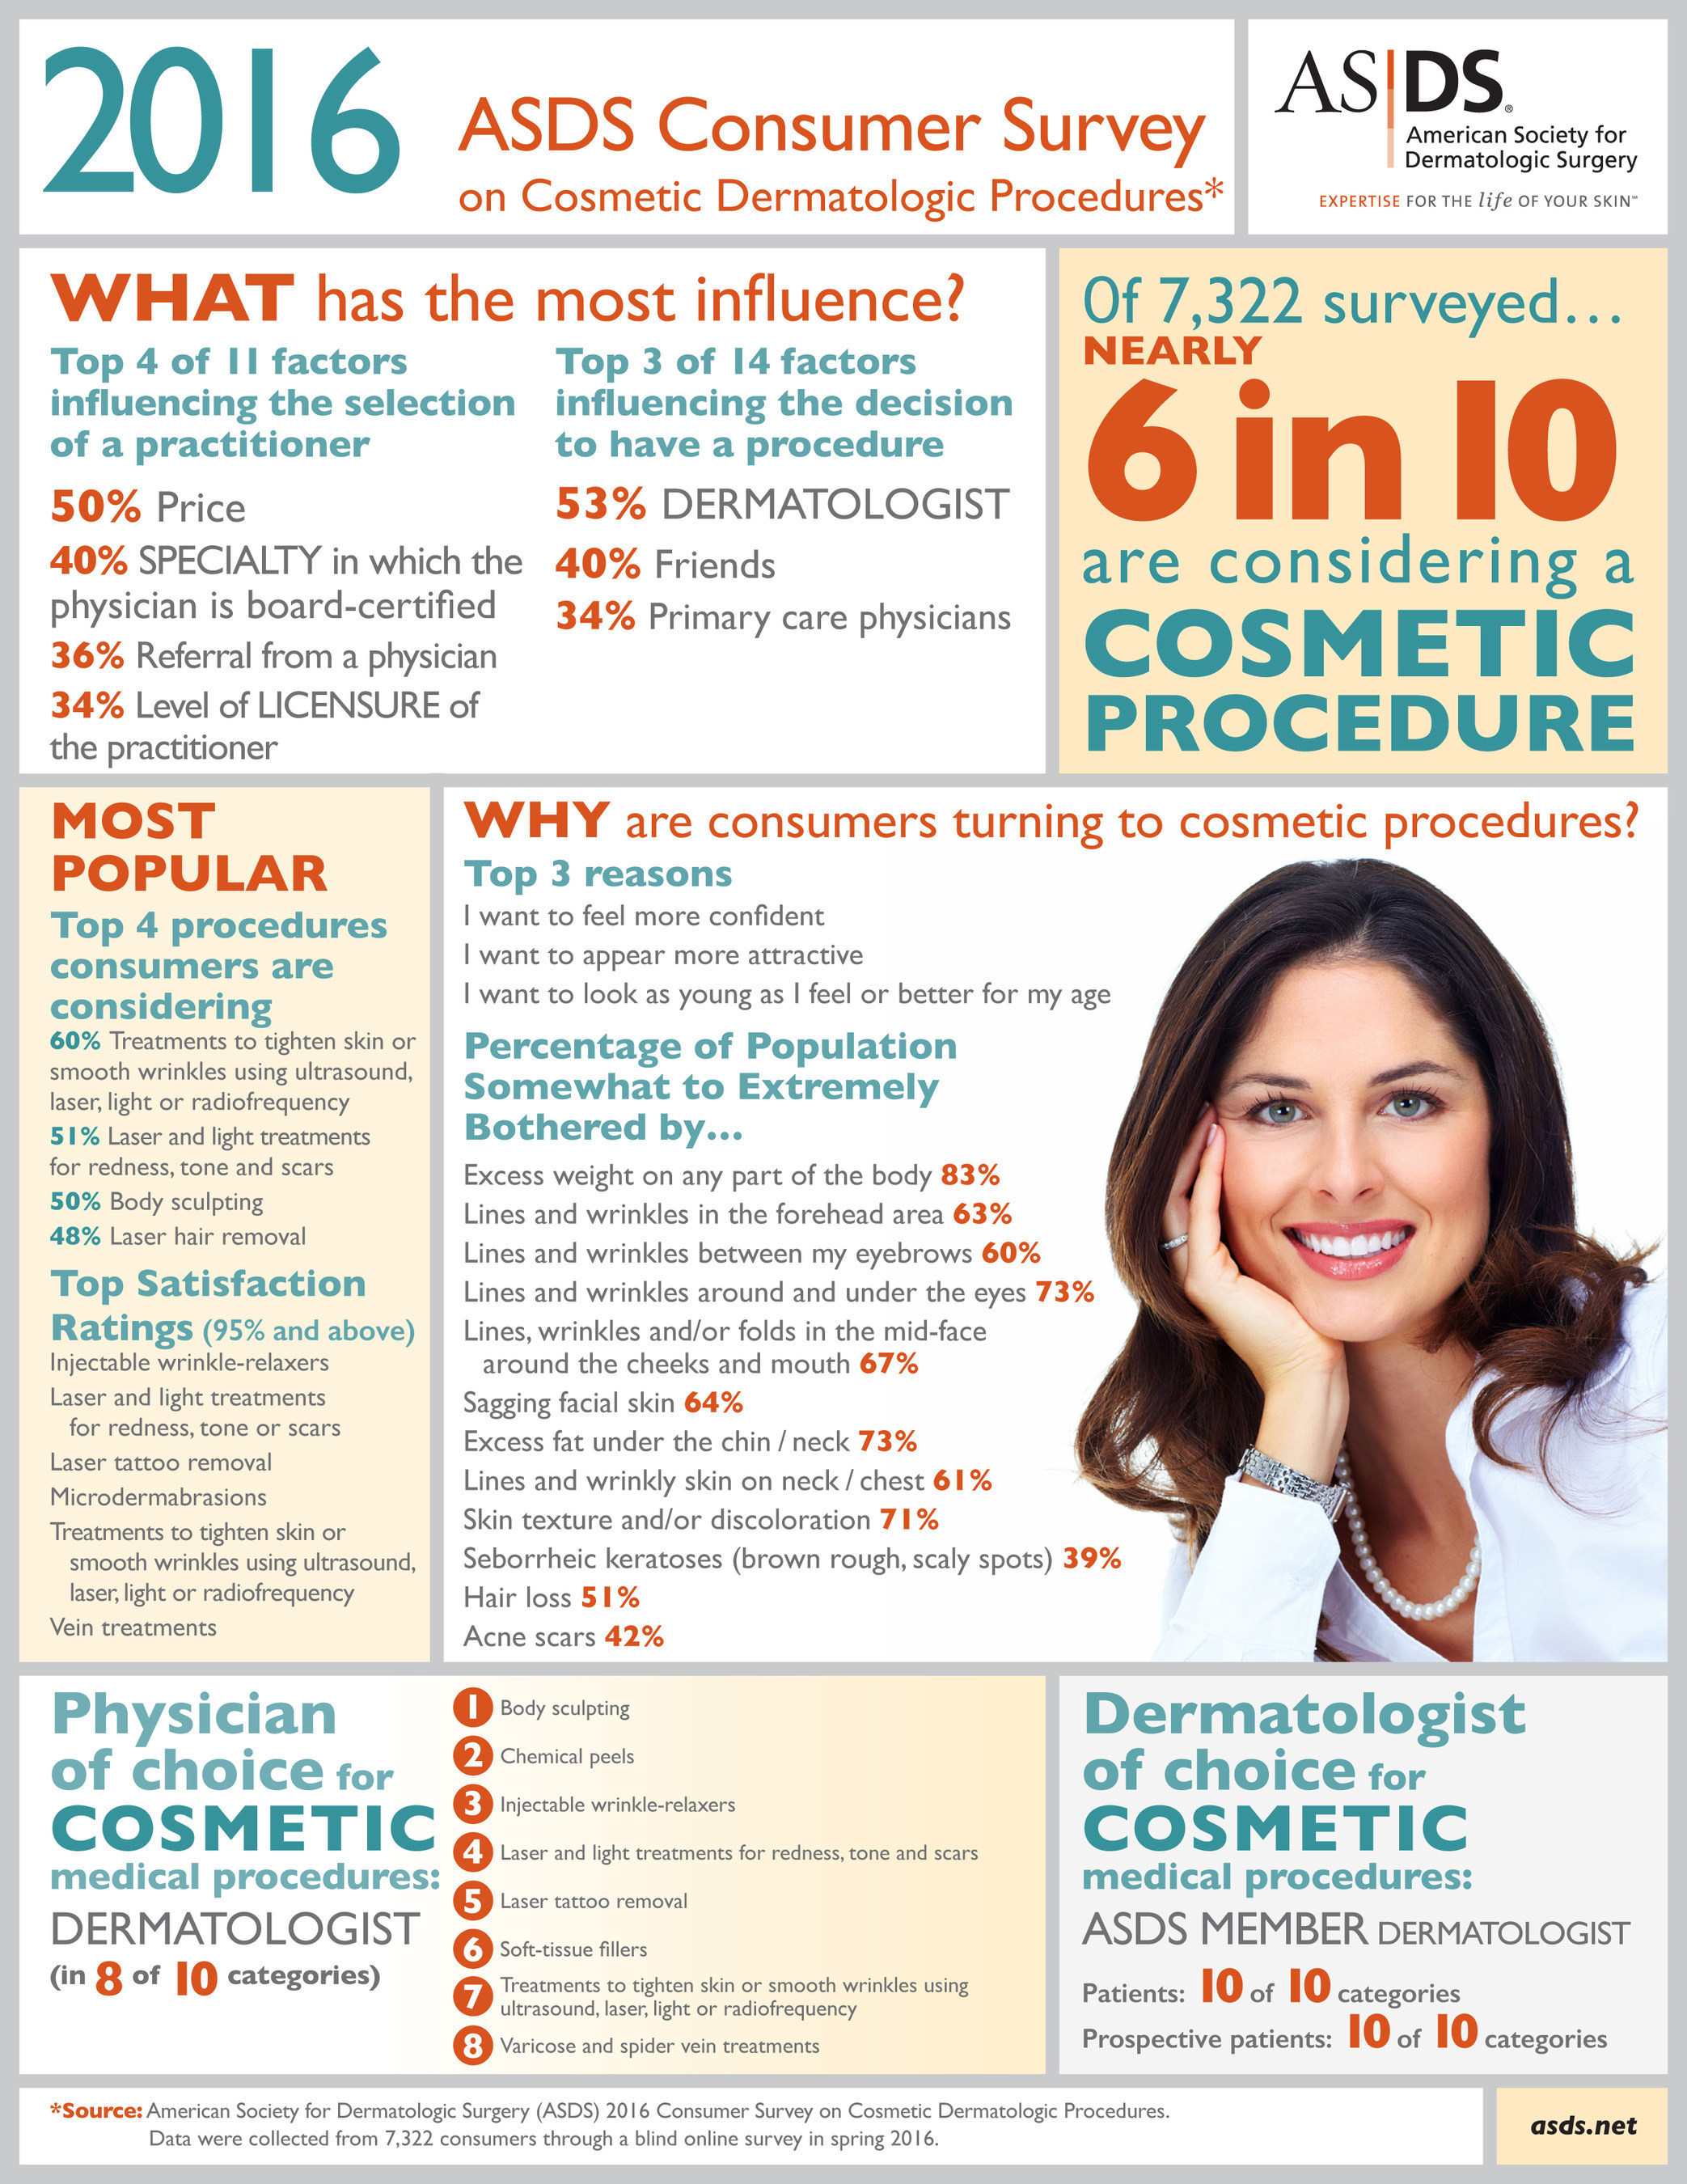 Nearly 60 percent of consumers now say they are considering a cosmetic treatment, up from 30 percent in 2013, according to the ASDS Consumer Survey on Cosmetic Dermatologic Procedures.